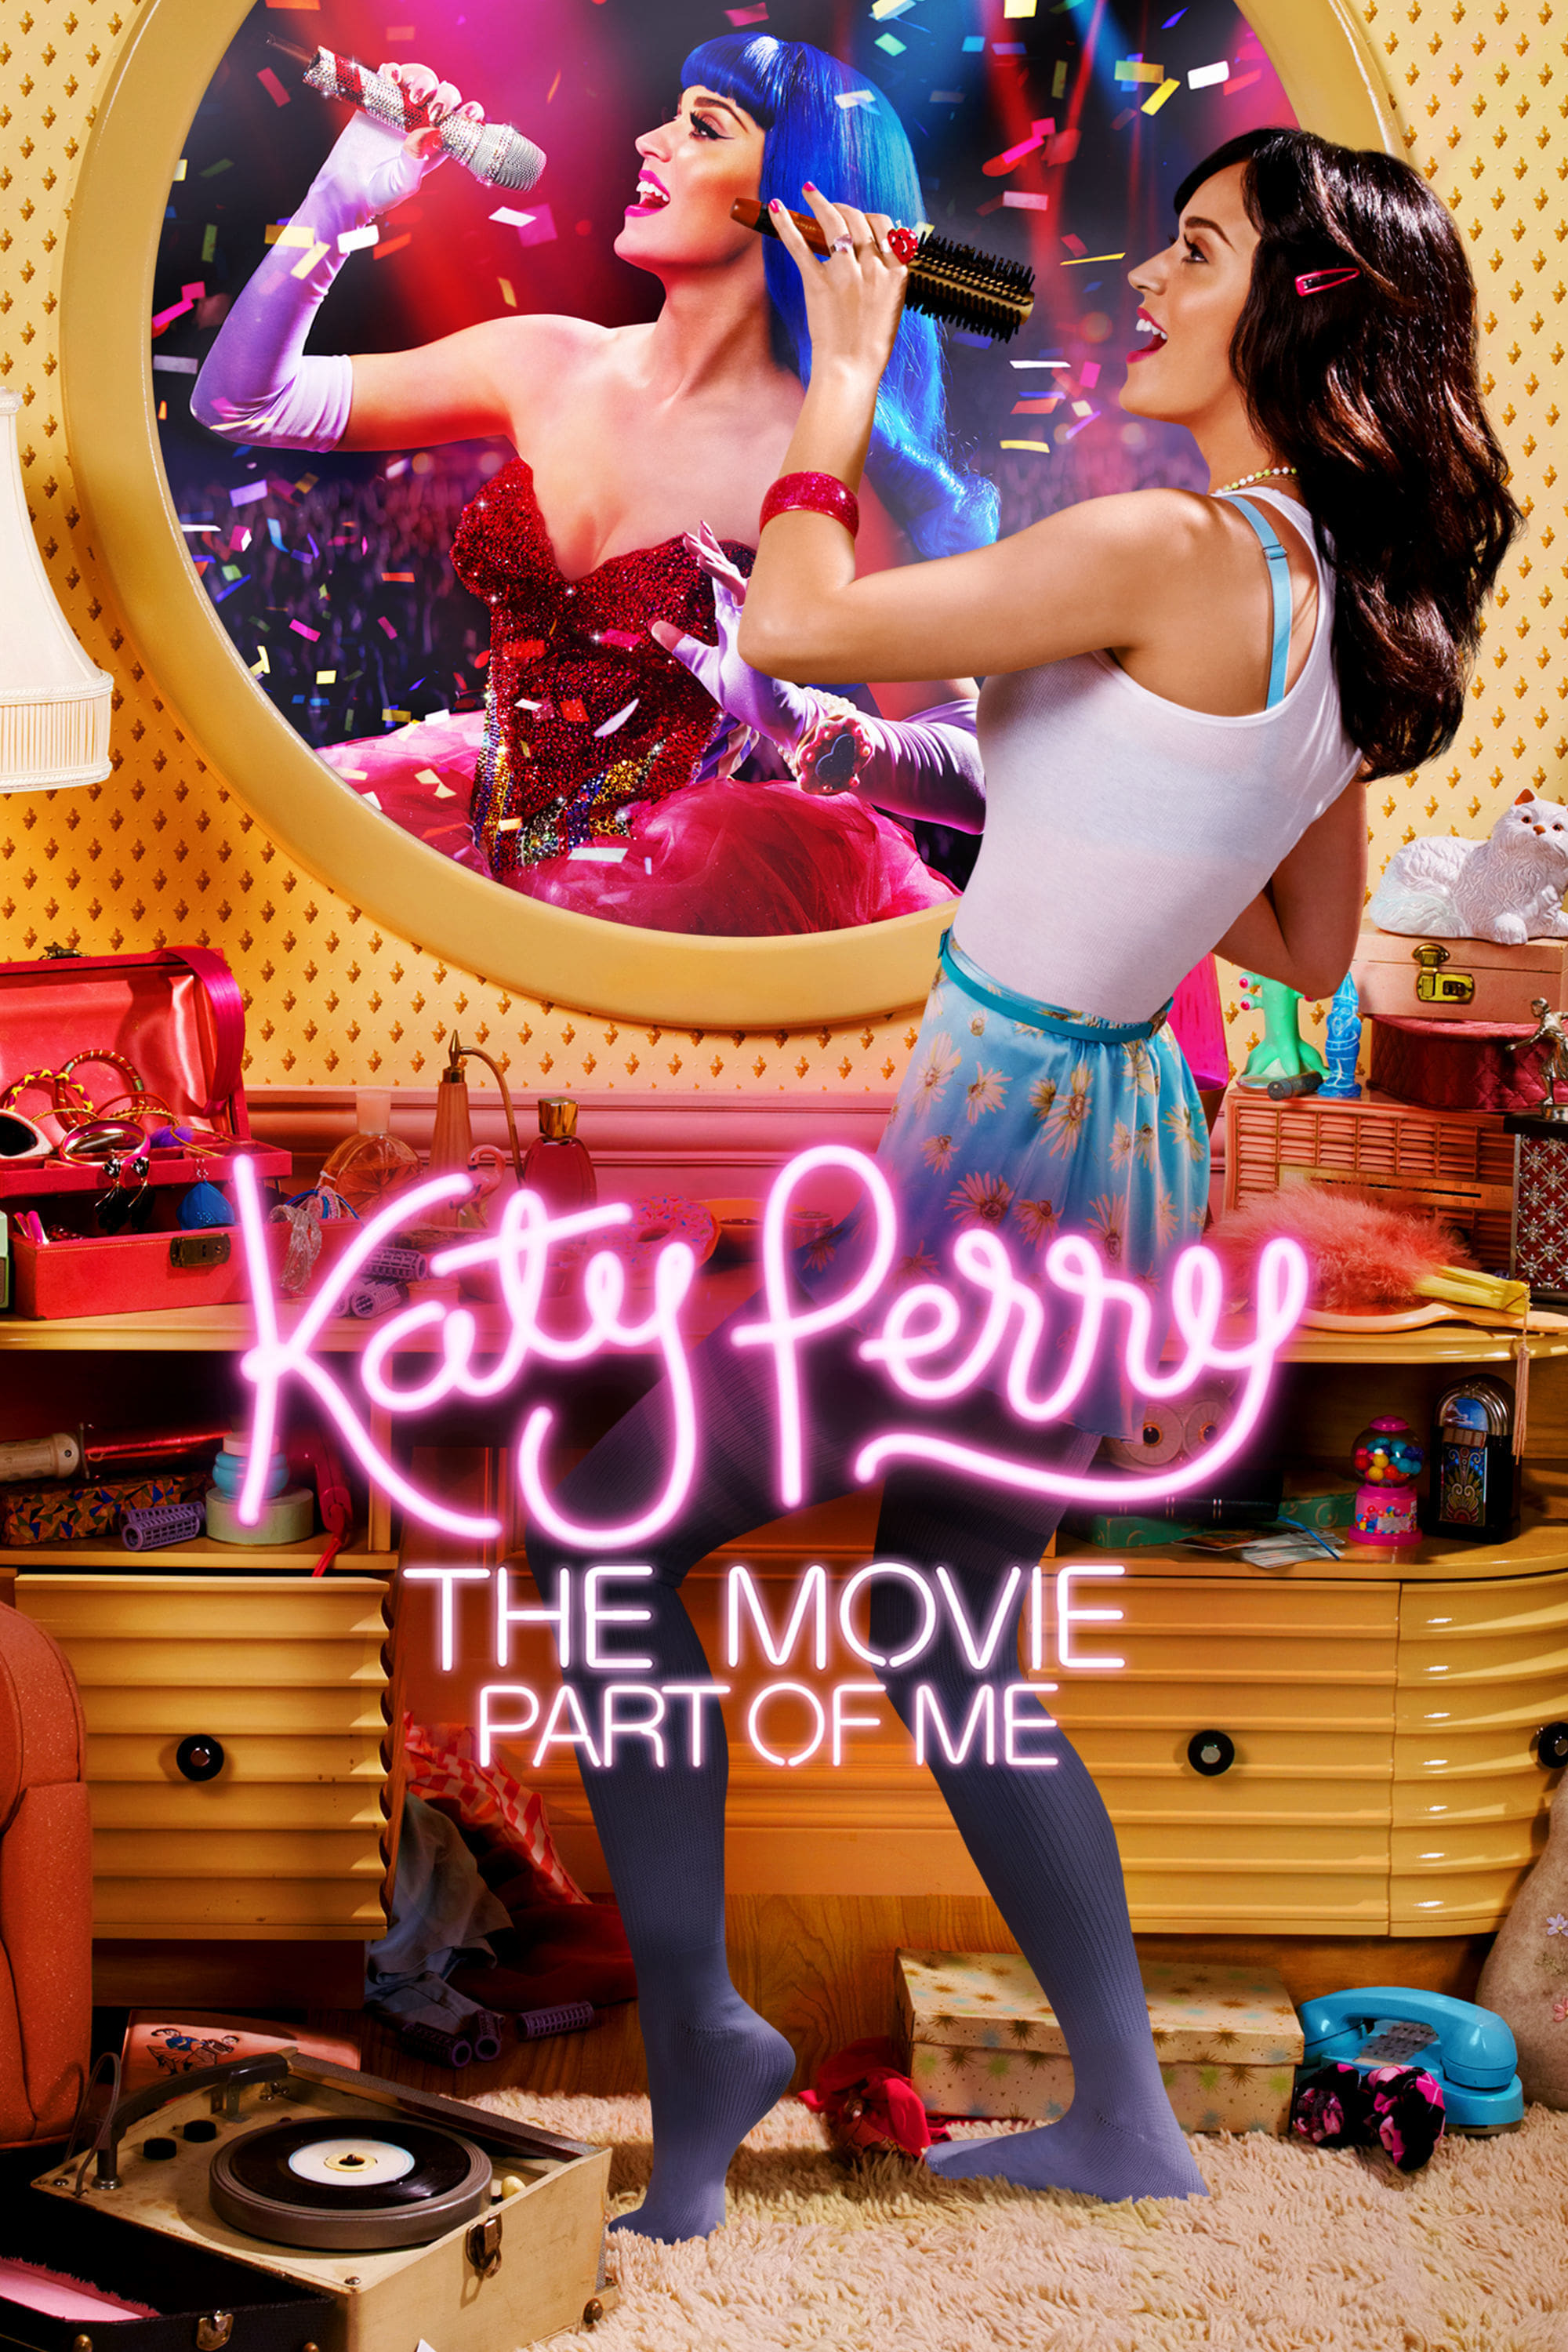 Katy Perry: Part of Me (Katy Perry: Part of Me) [2012]